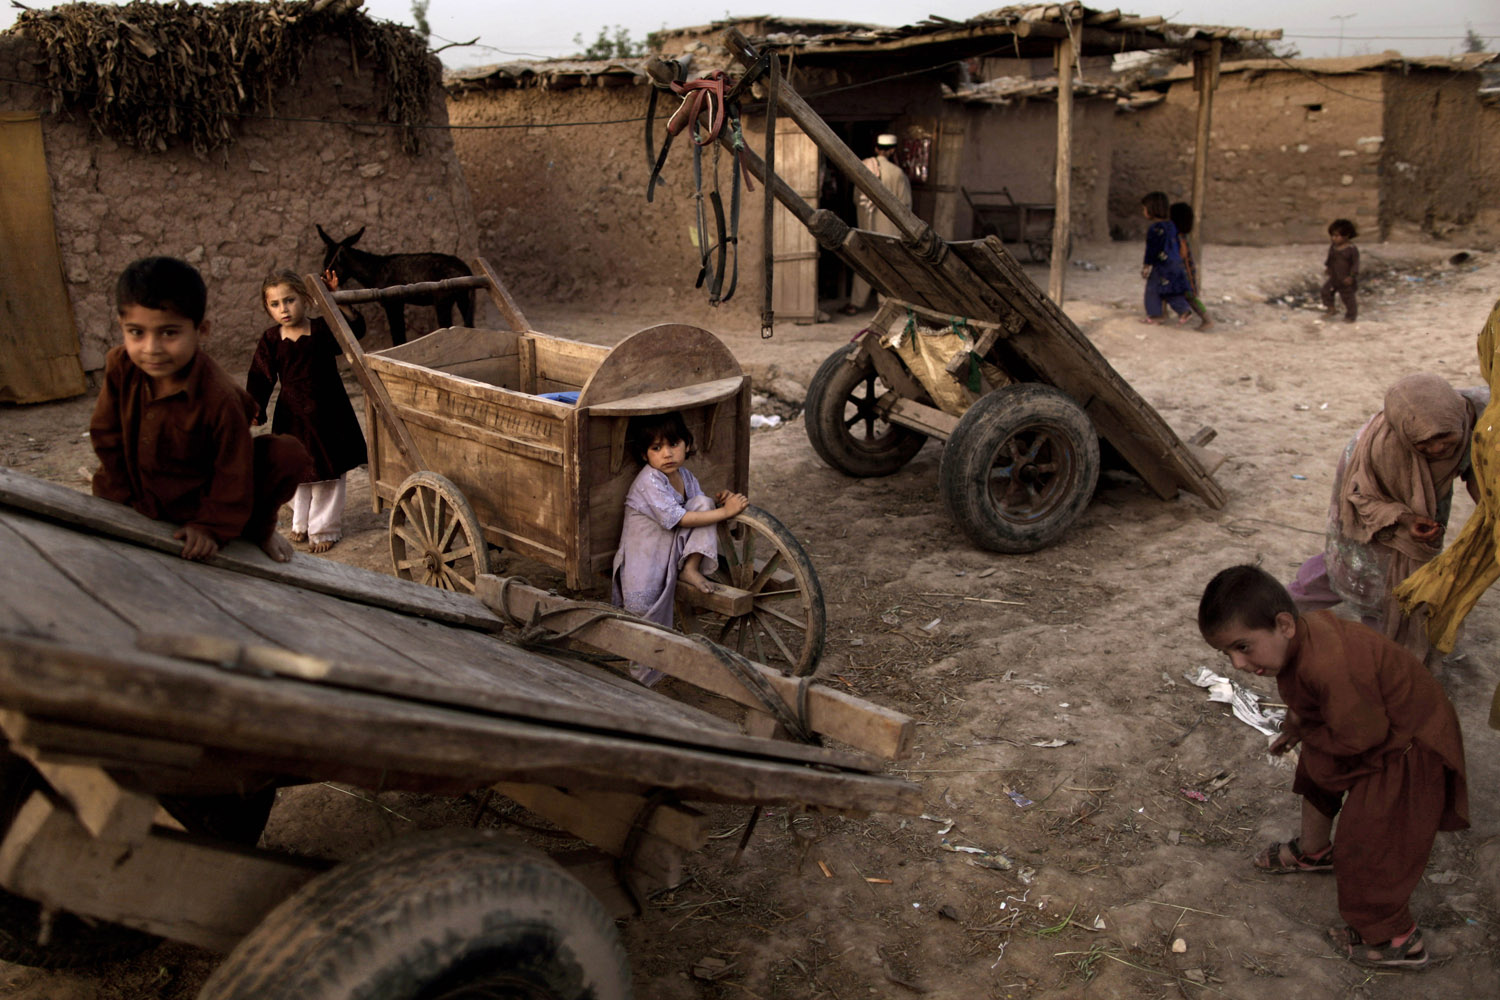 April 11, 2013. Afghan refugee children play around wooden carts left in a poor neighborhood on the outskirts of Islamabad.